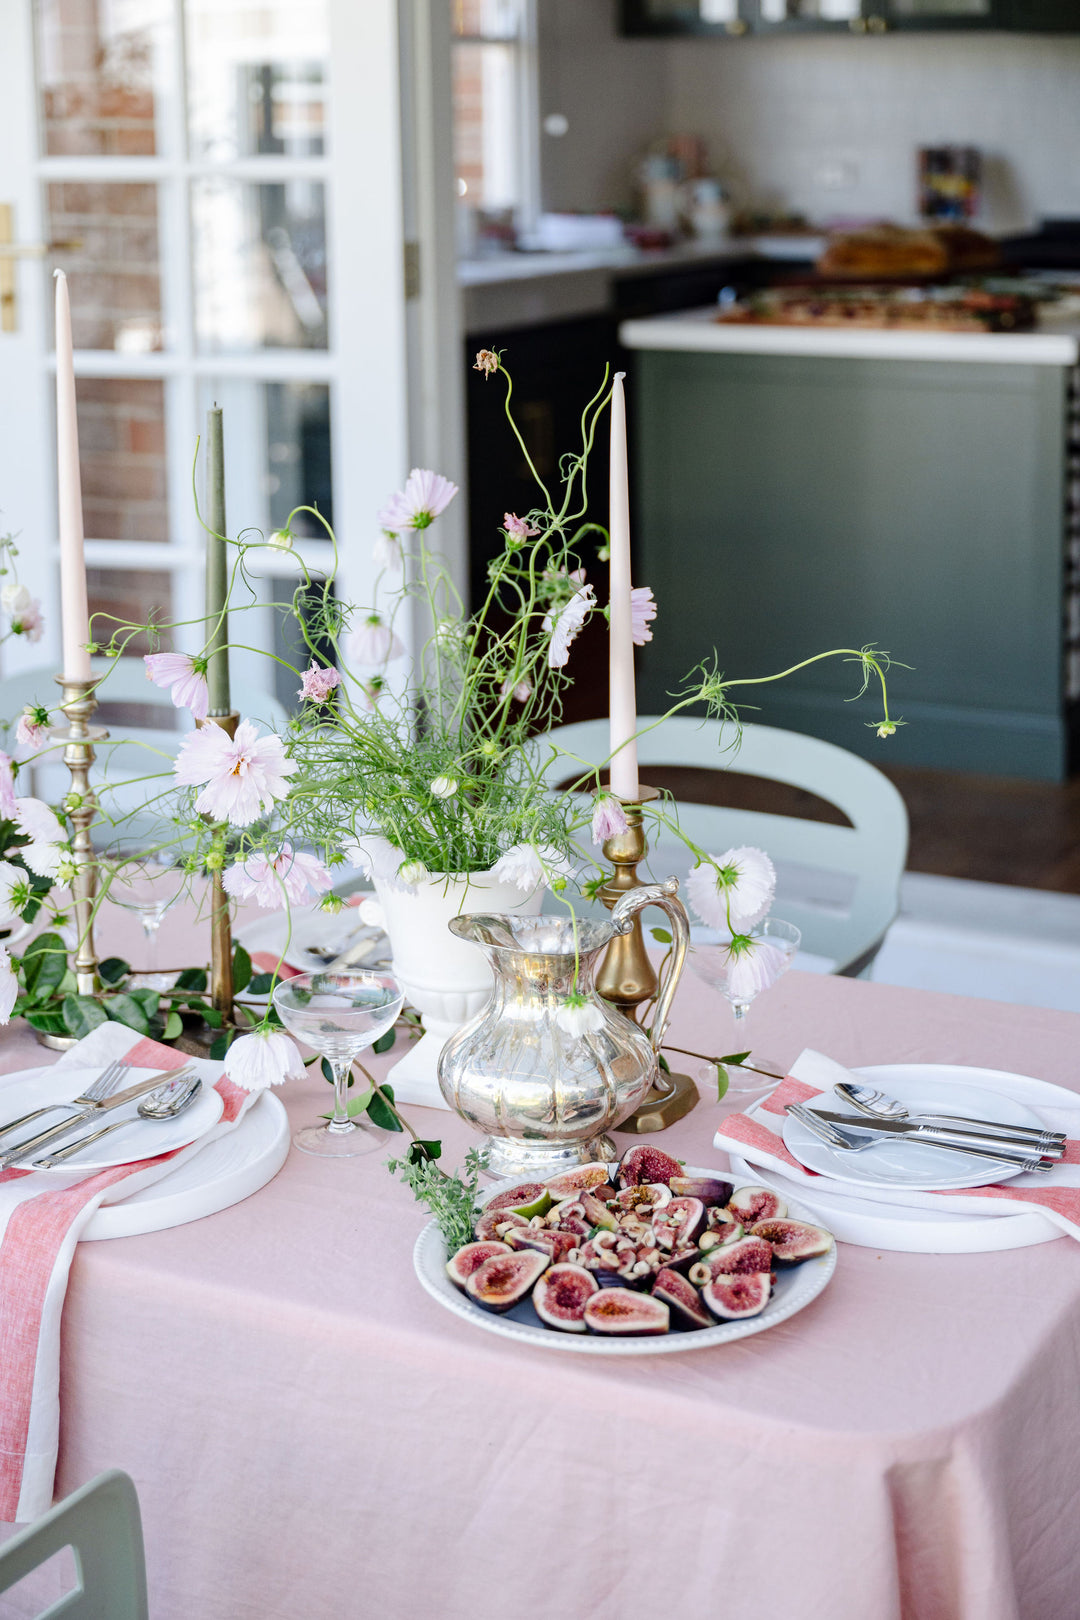 Best Sellers - Rosé Pink Linen Napkins and Tablecloths